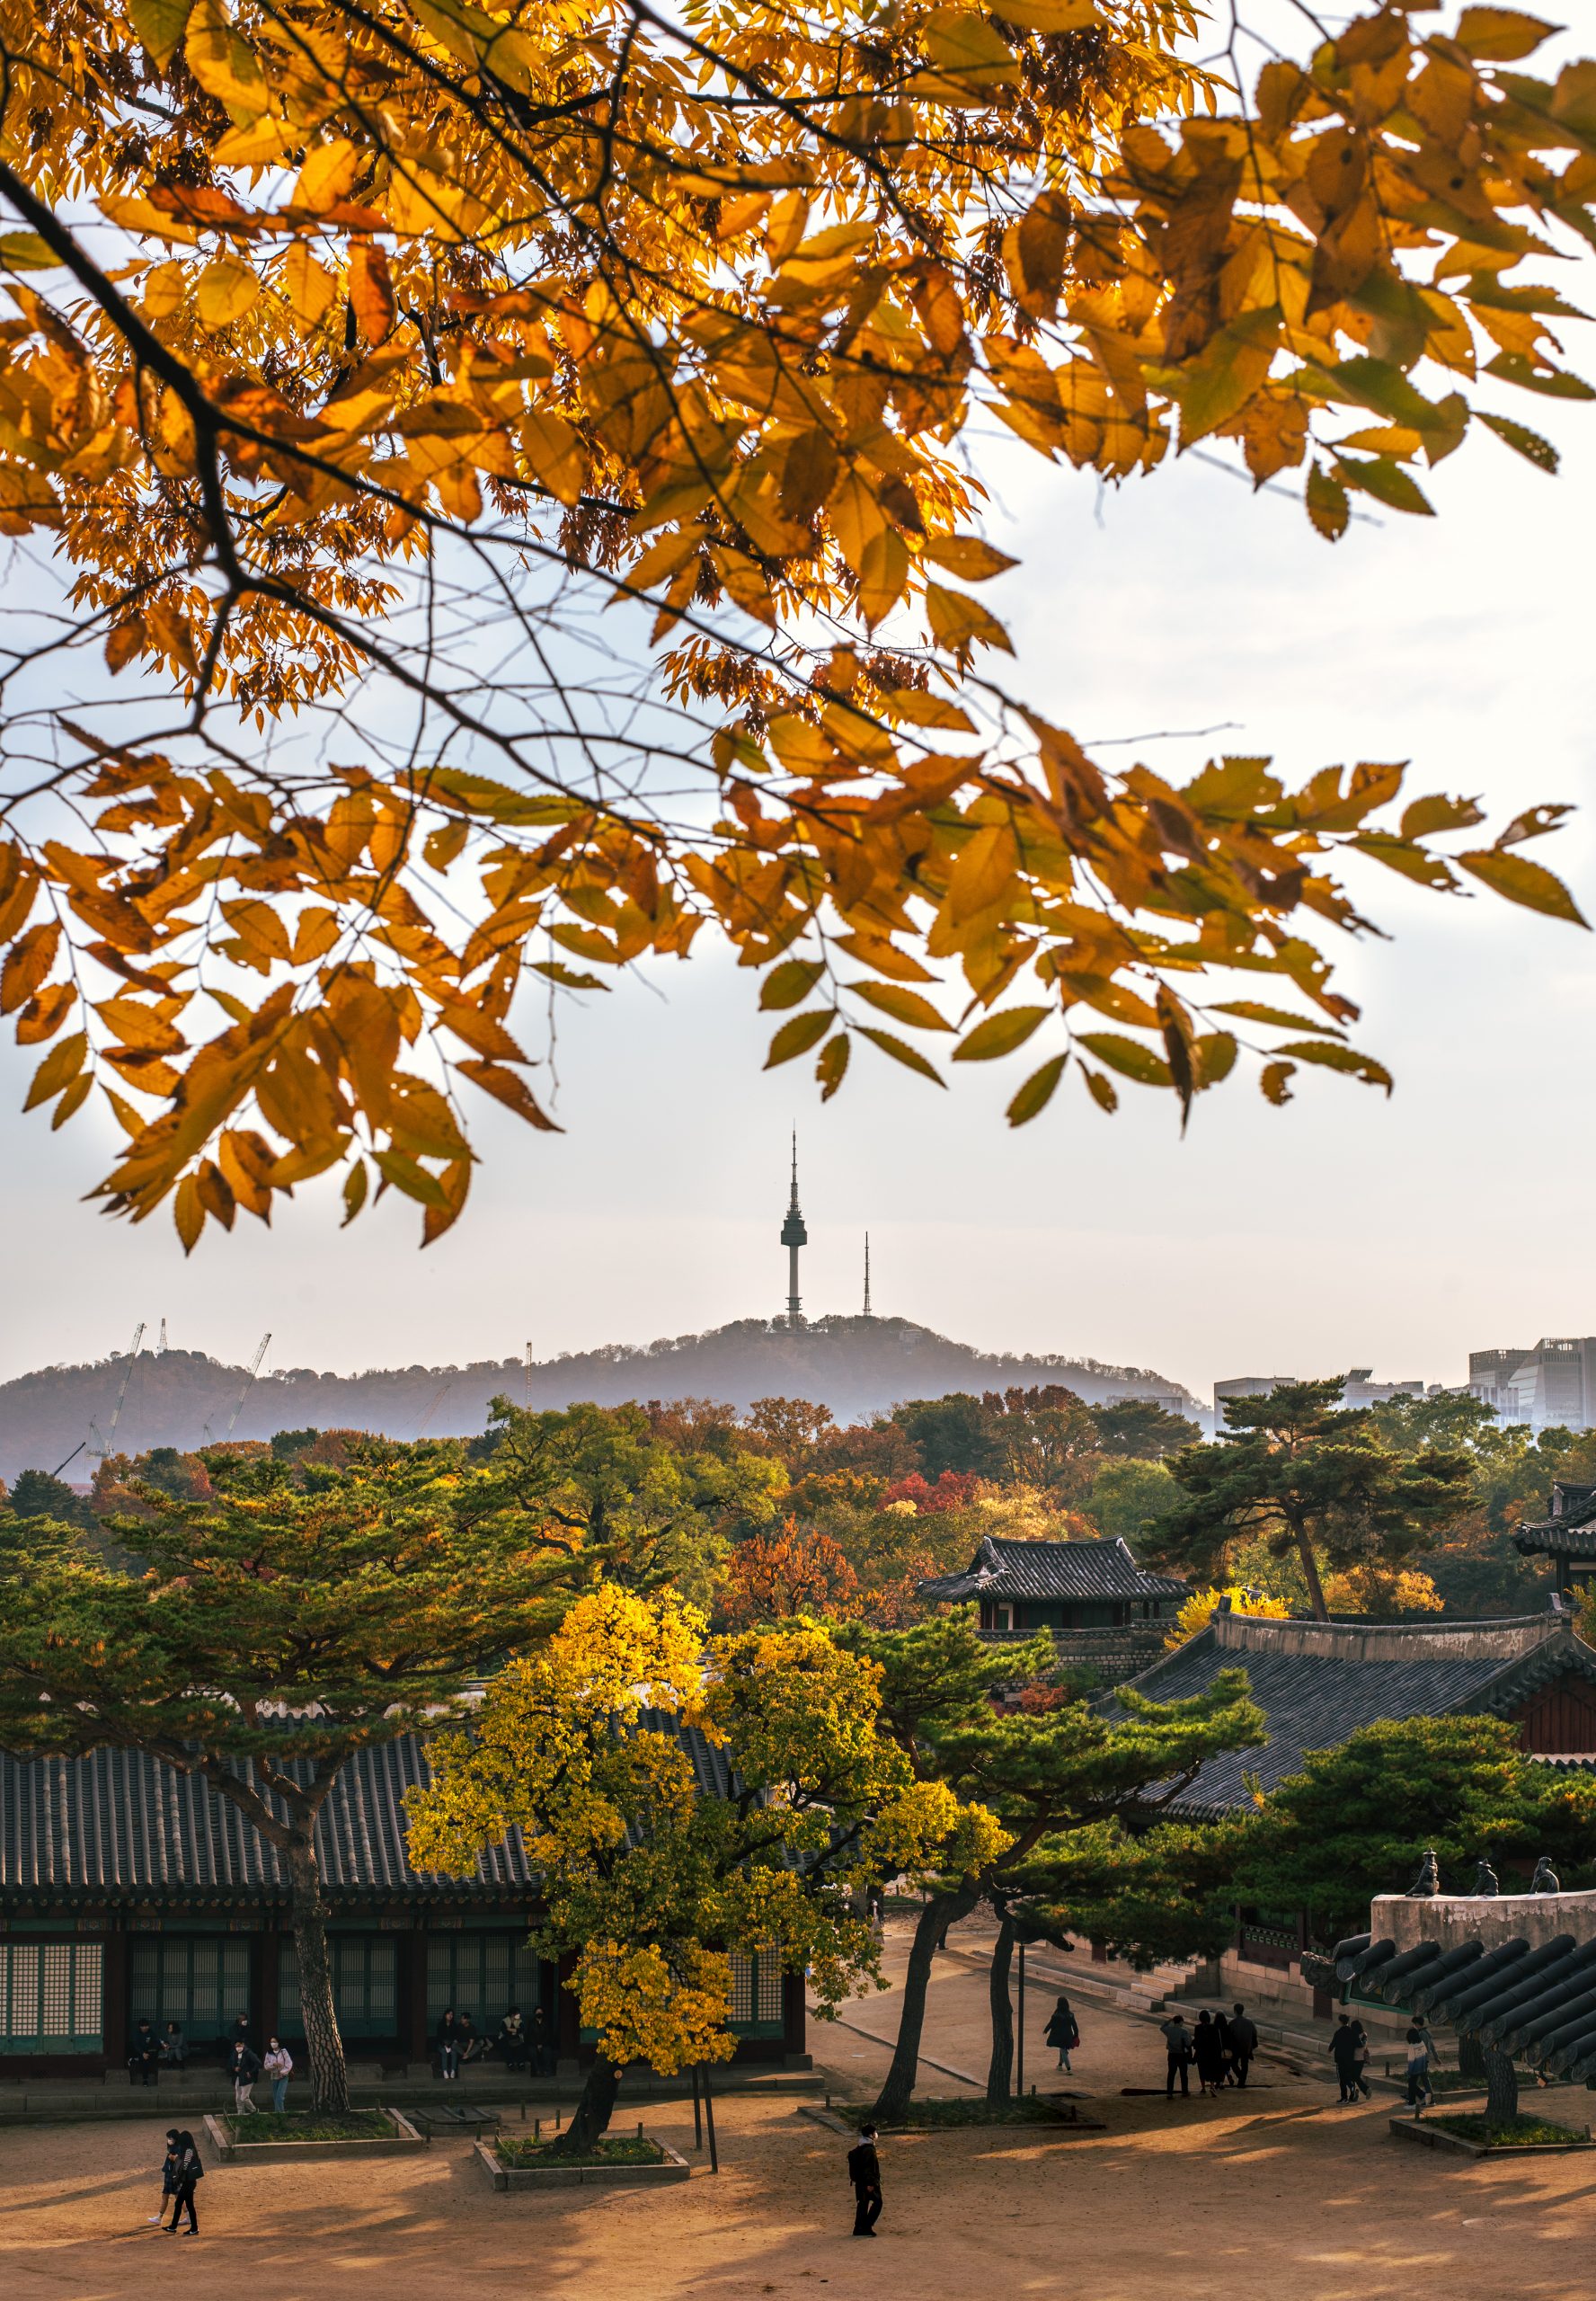 Namsan tower and Changkyung-gung with autumn leaves on tree branches foreground in Seoul, Korea